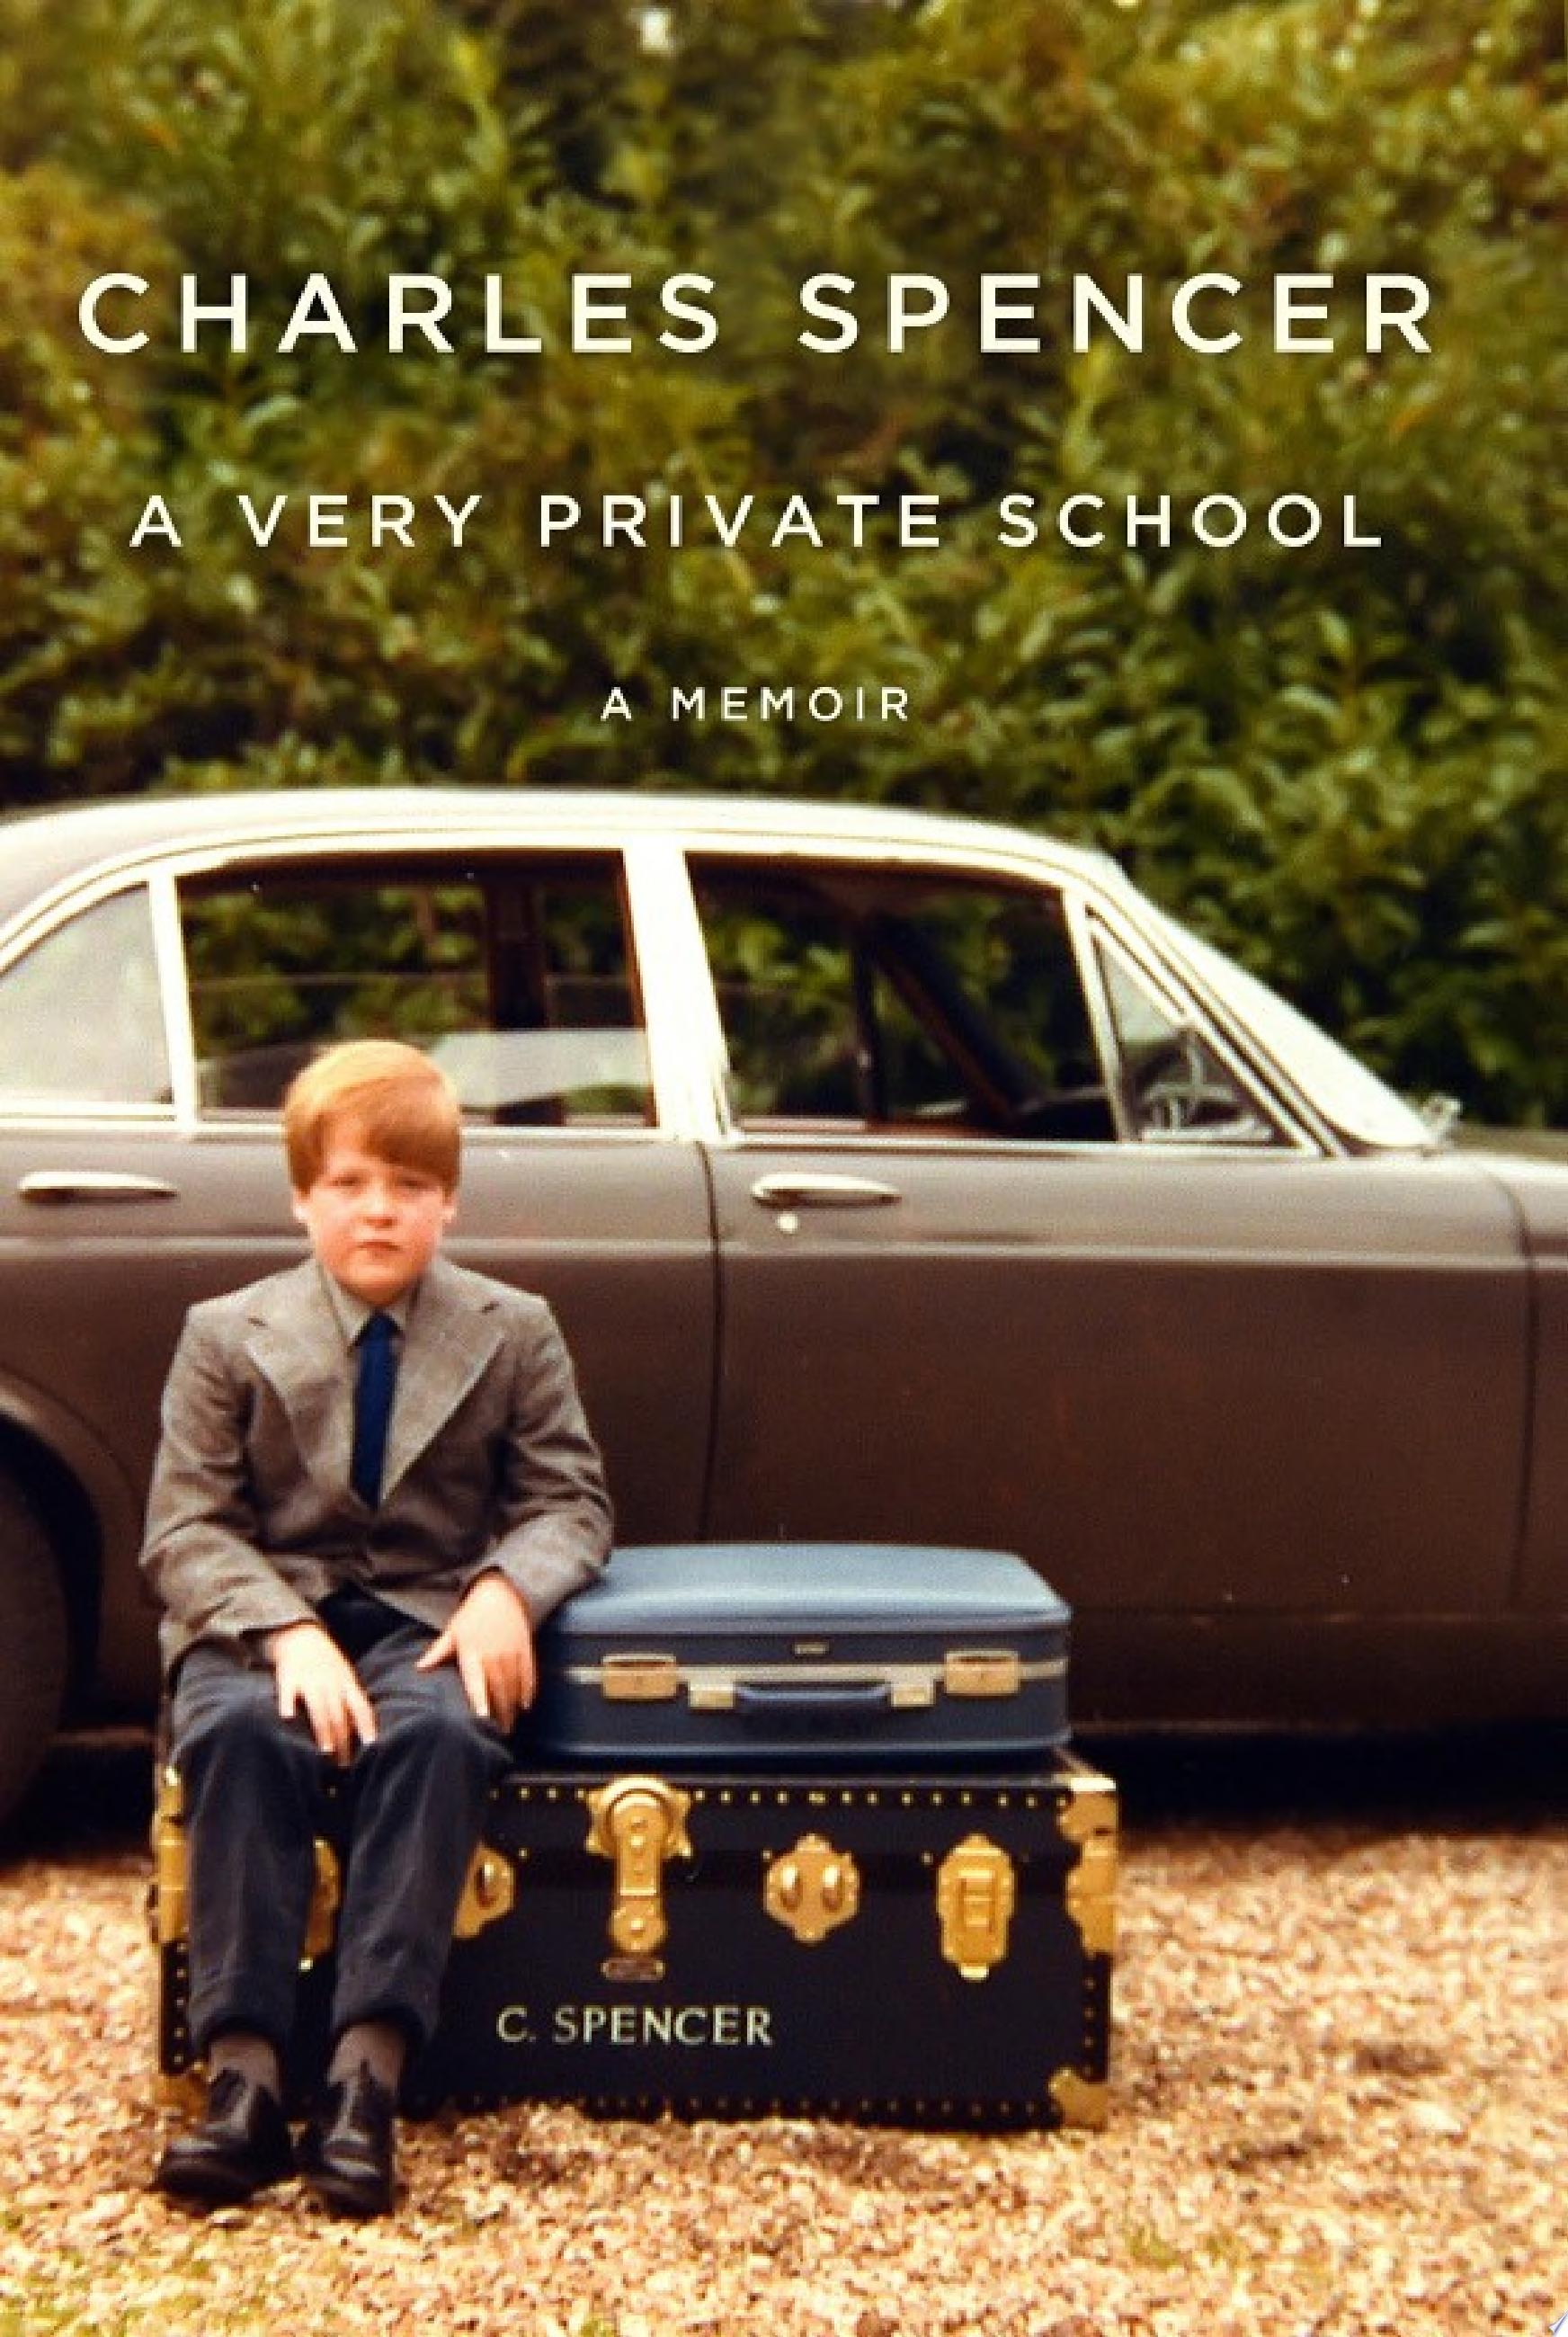 Image for "A Very Private School"